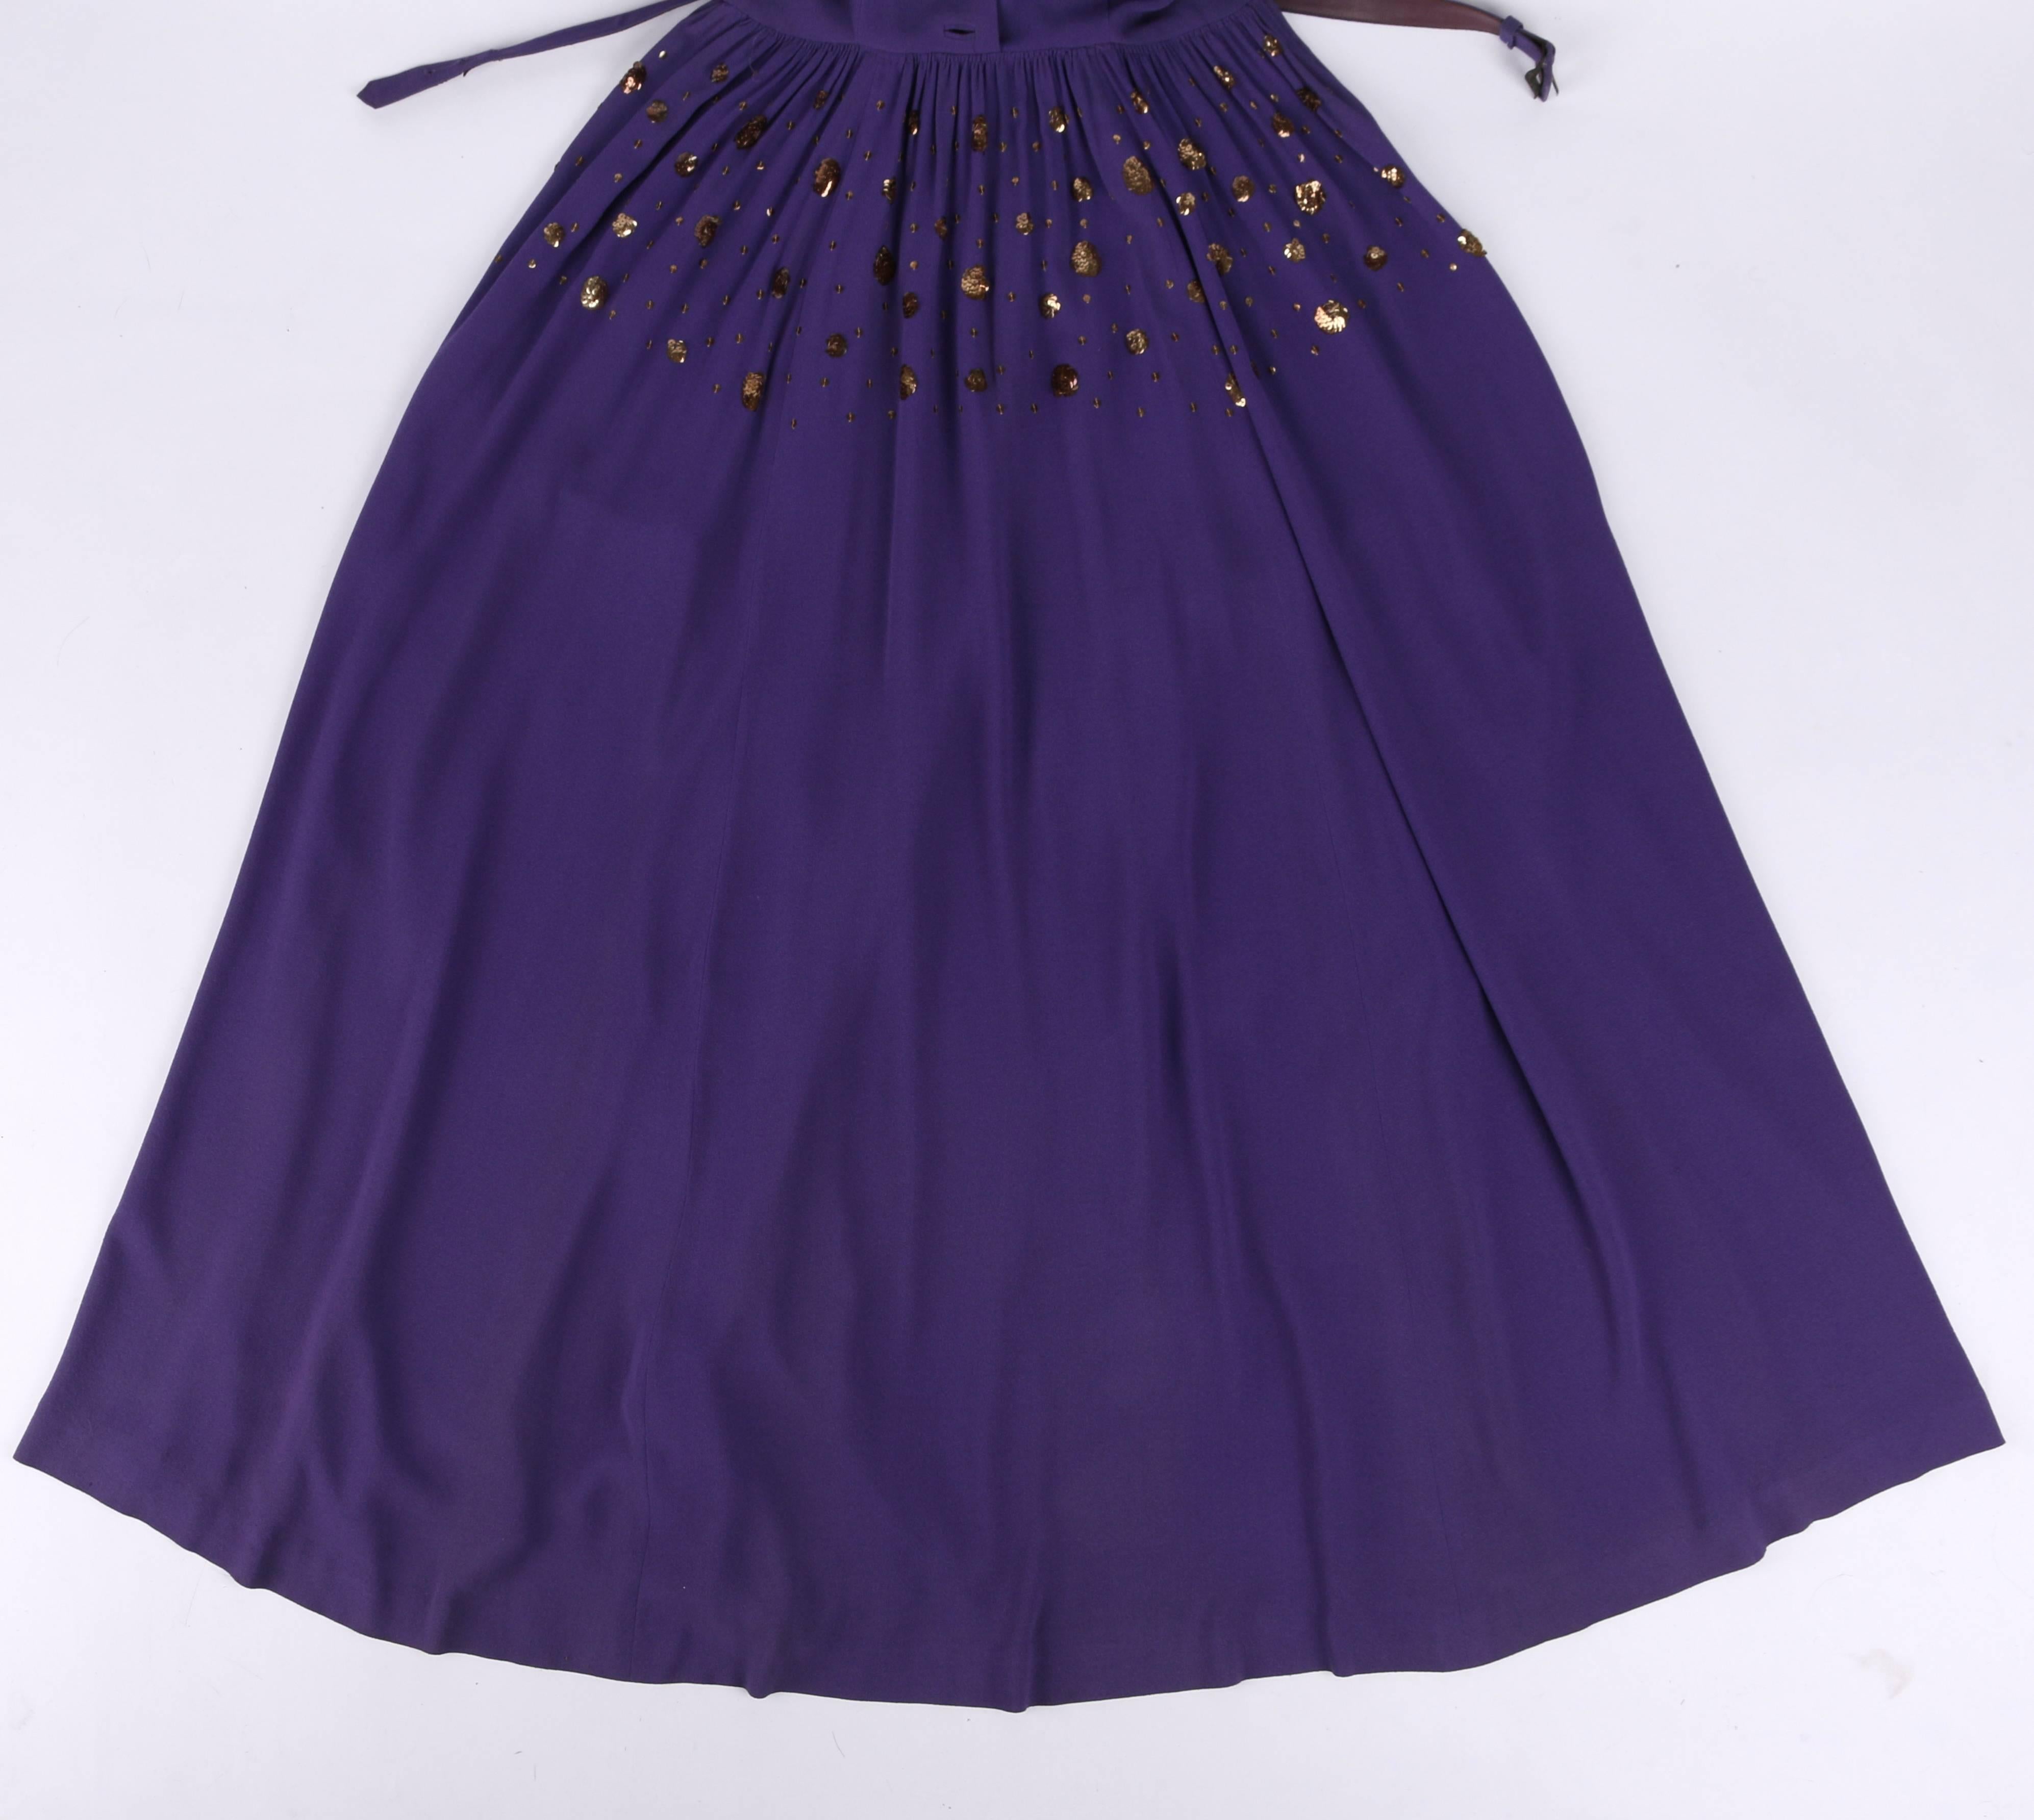 COUTURE c.1940's Purple Gold Belted Sequin Embellished Evening Dress Gown In Excellent Condition For Sale In Thiensville, WI